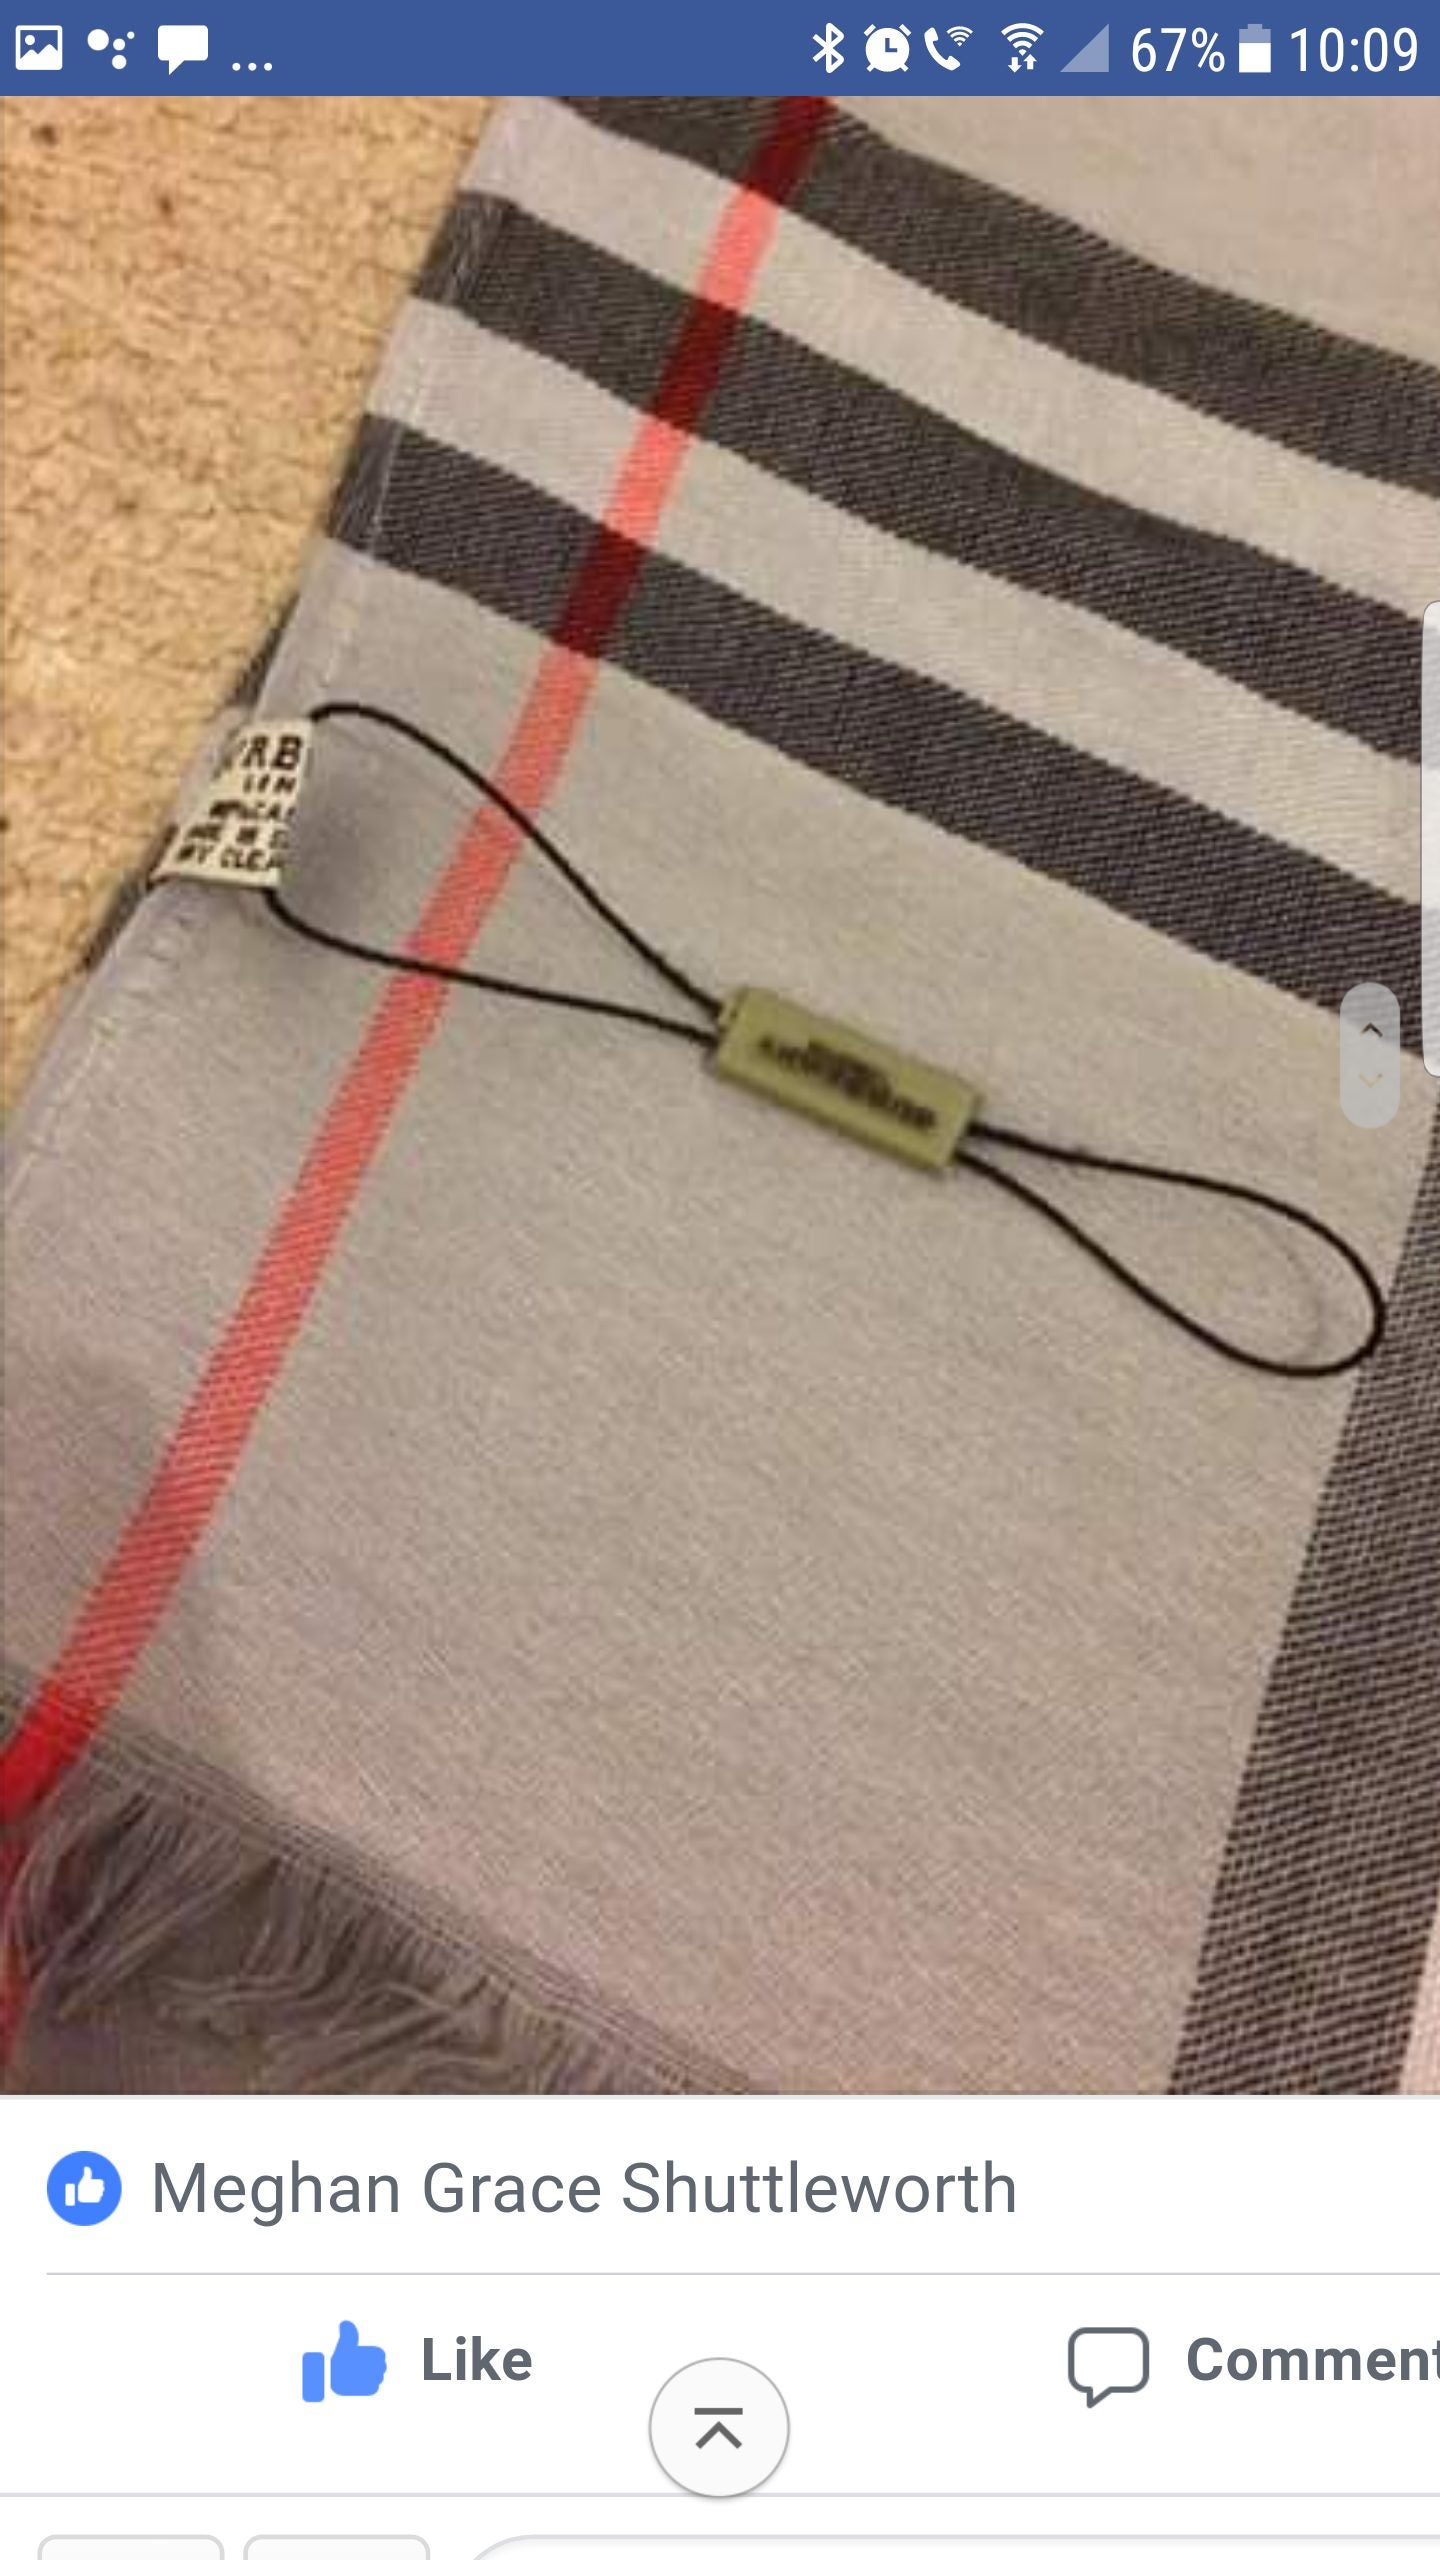 How to Spot a Fake Burberry Scarf - Learn how to